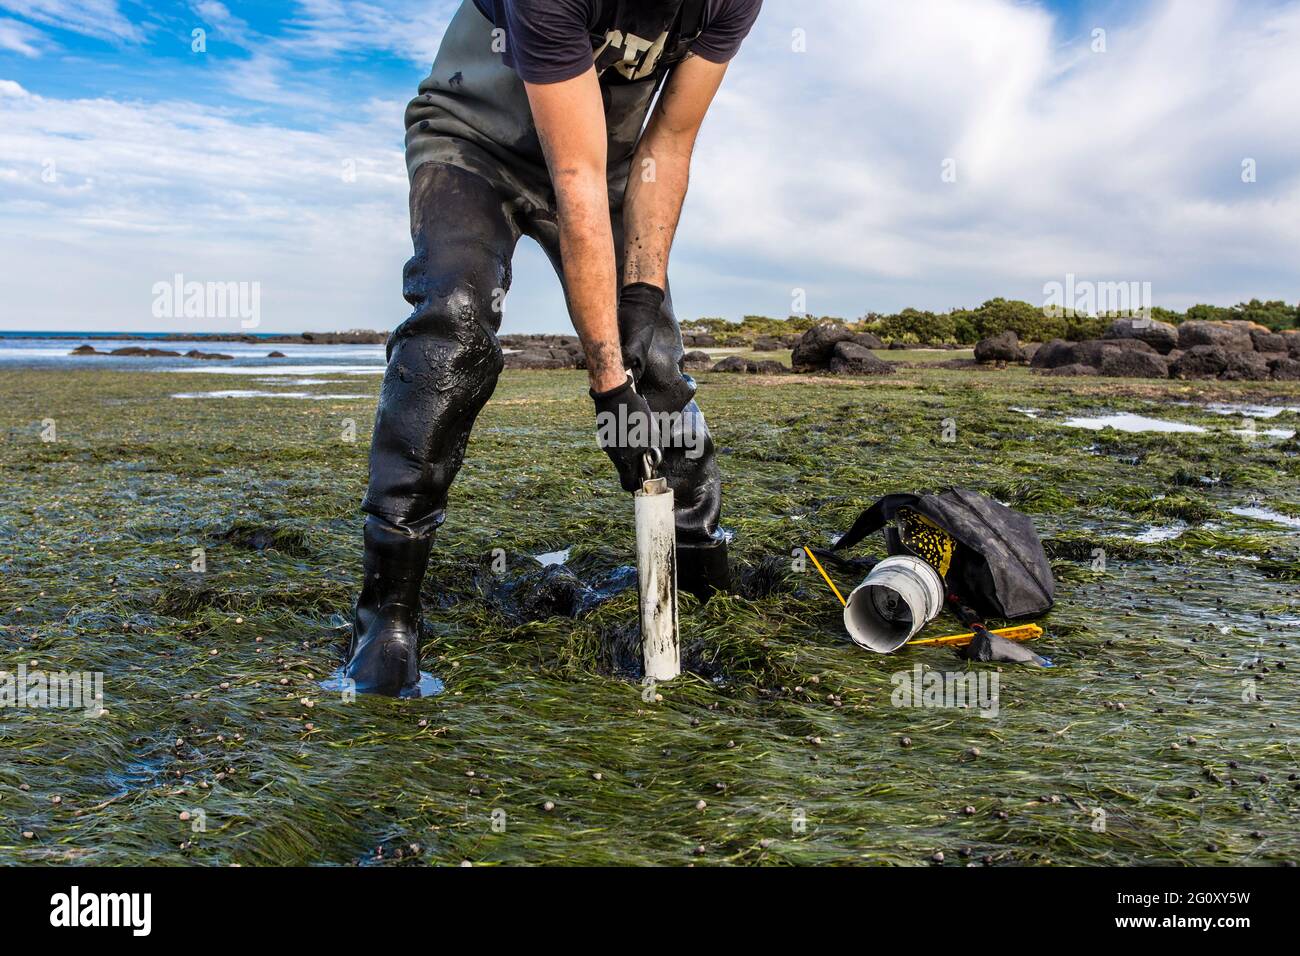 Scientist collecting a sediment core to asses carbon sequestration rates in the sediment of a tidal seagrass bed. Stock Photo